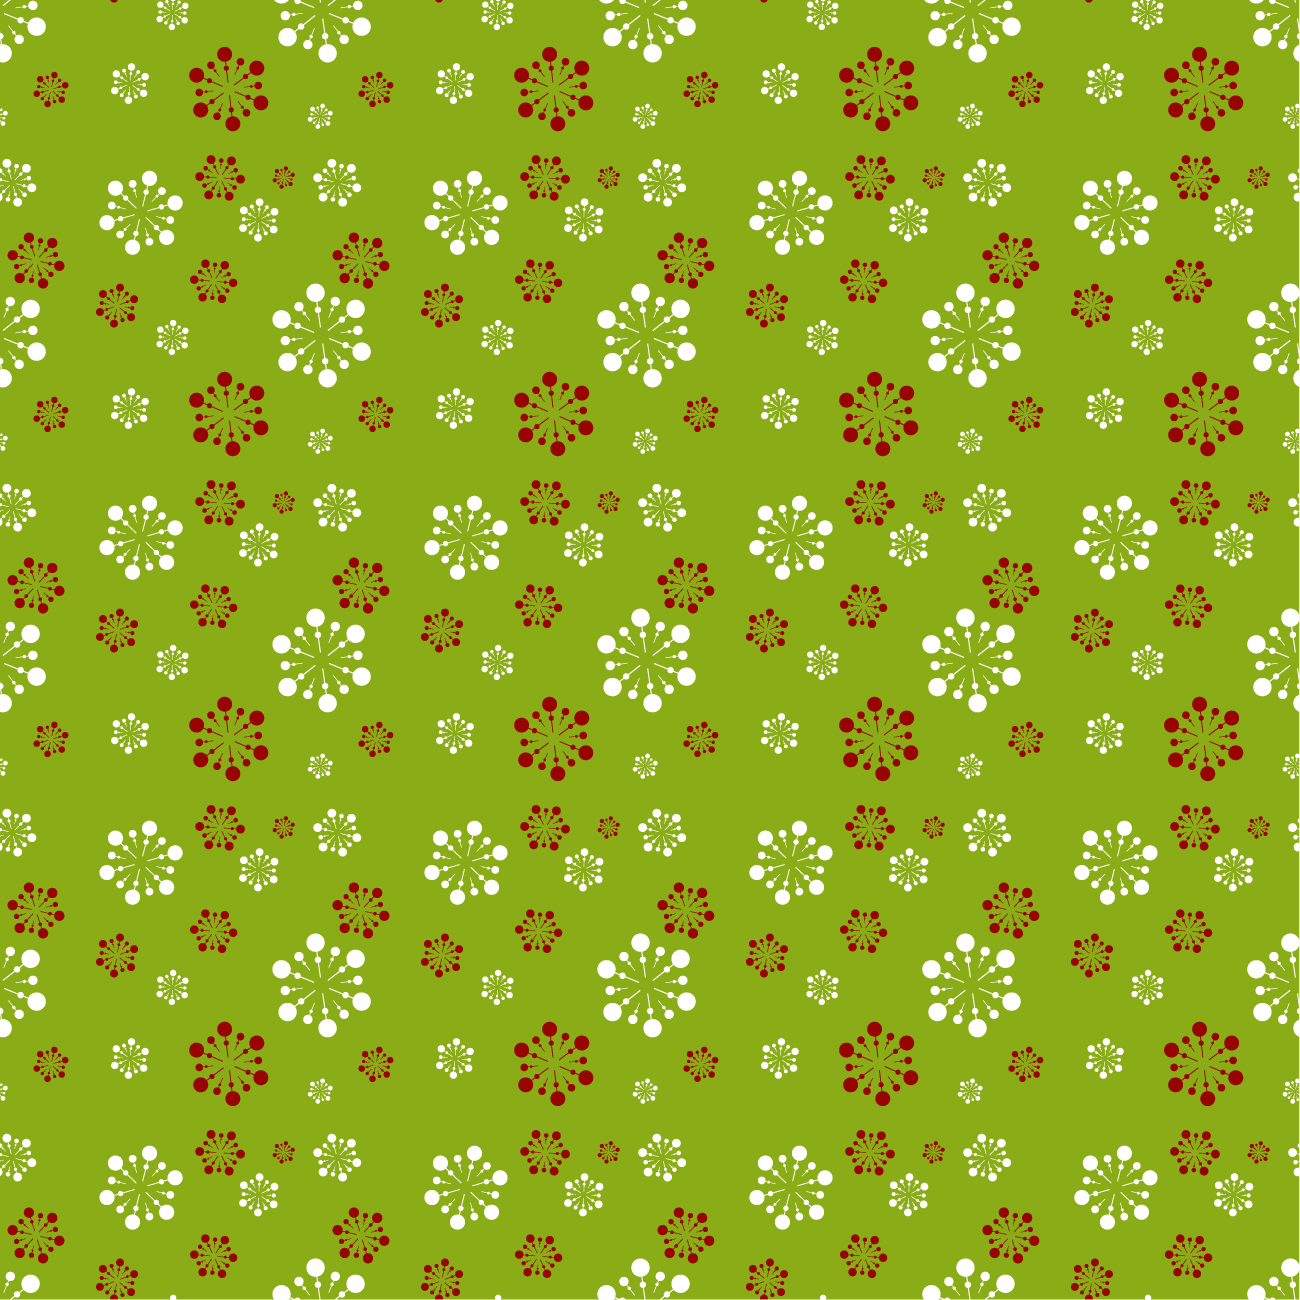 Wallpapers green background flowers texture on the desktop